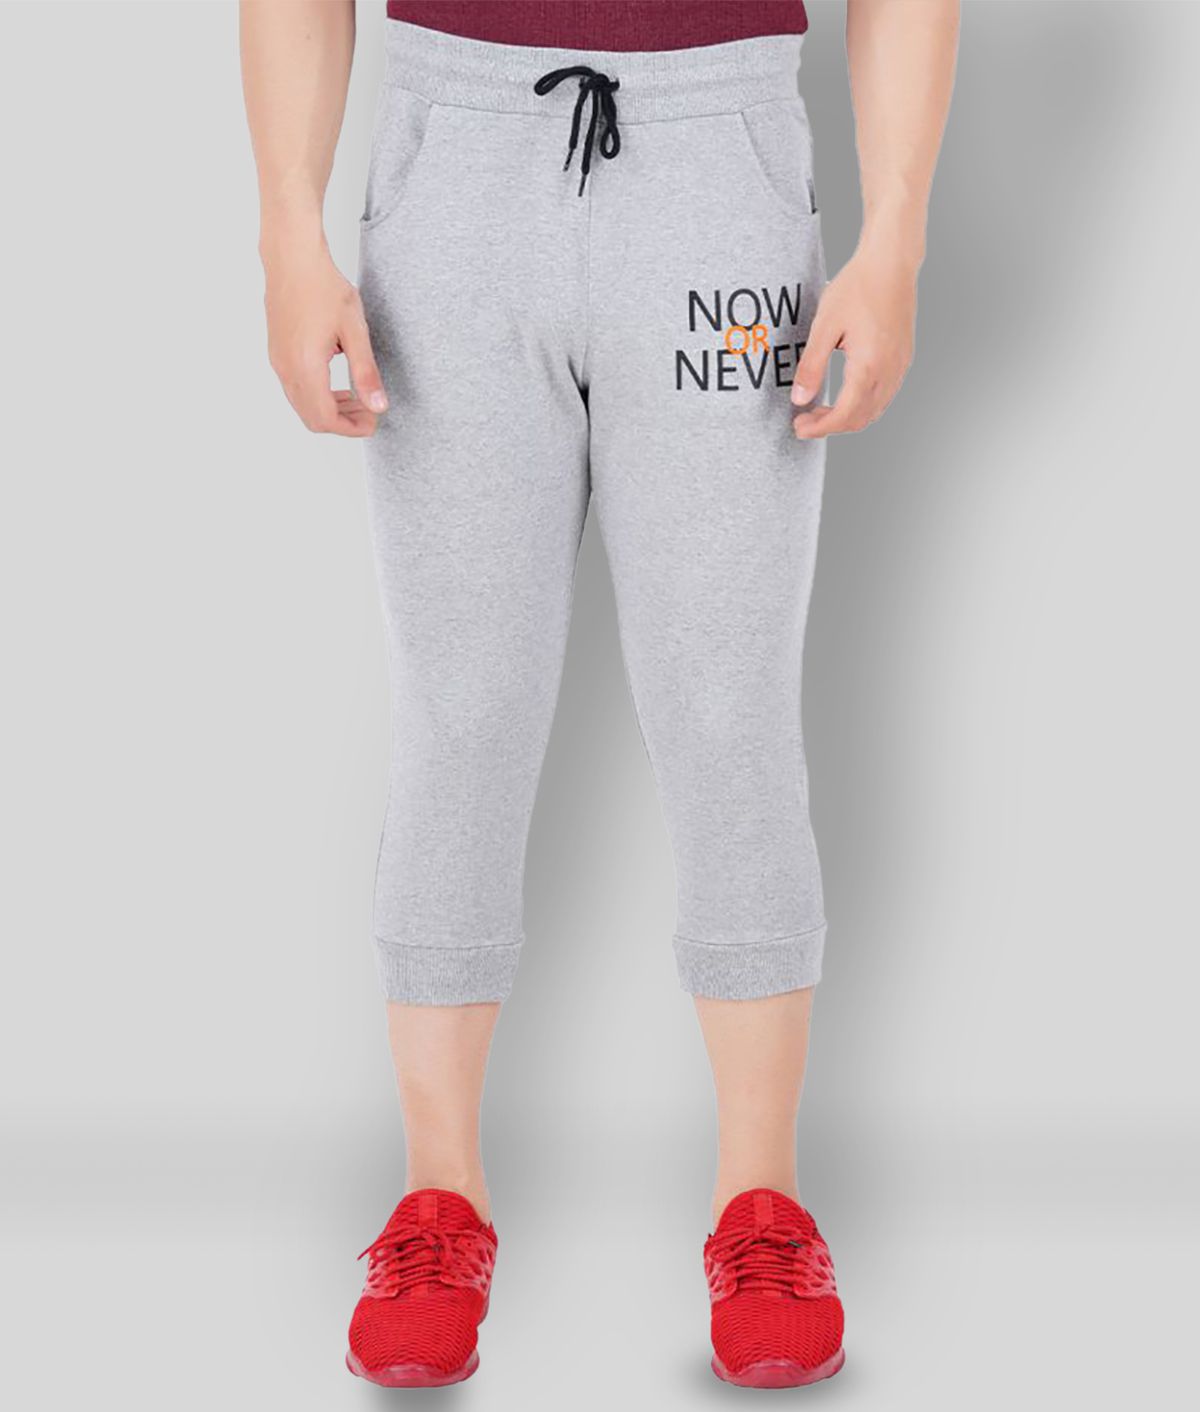     			NOW OR NEVER - Grey Cotton Blend Men's Three-Fourths ( Pack of 1 )